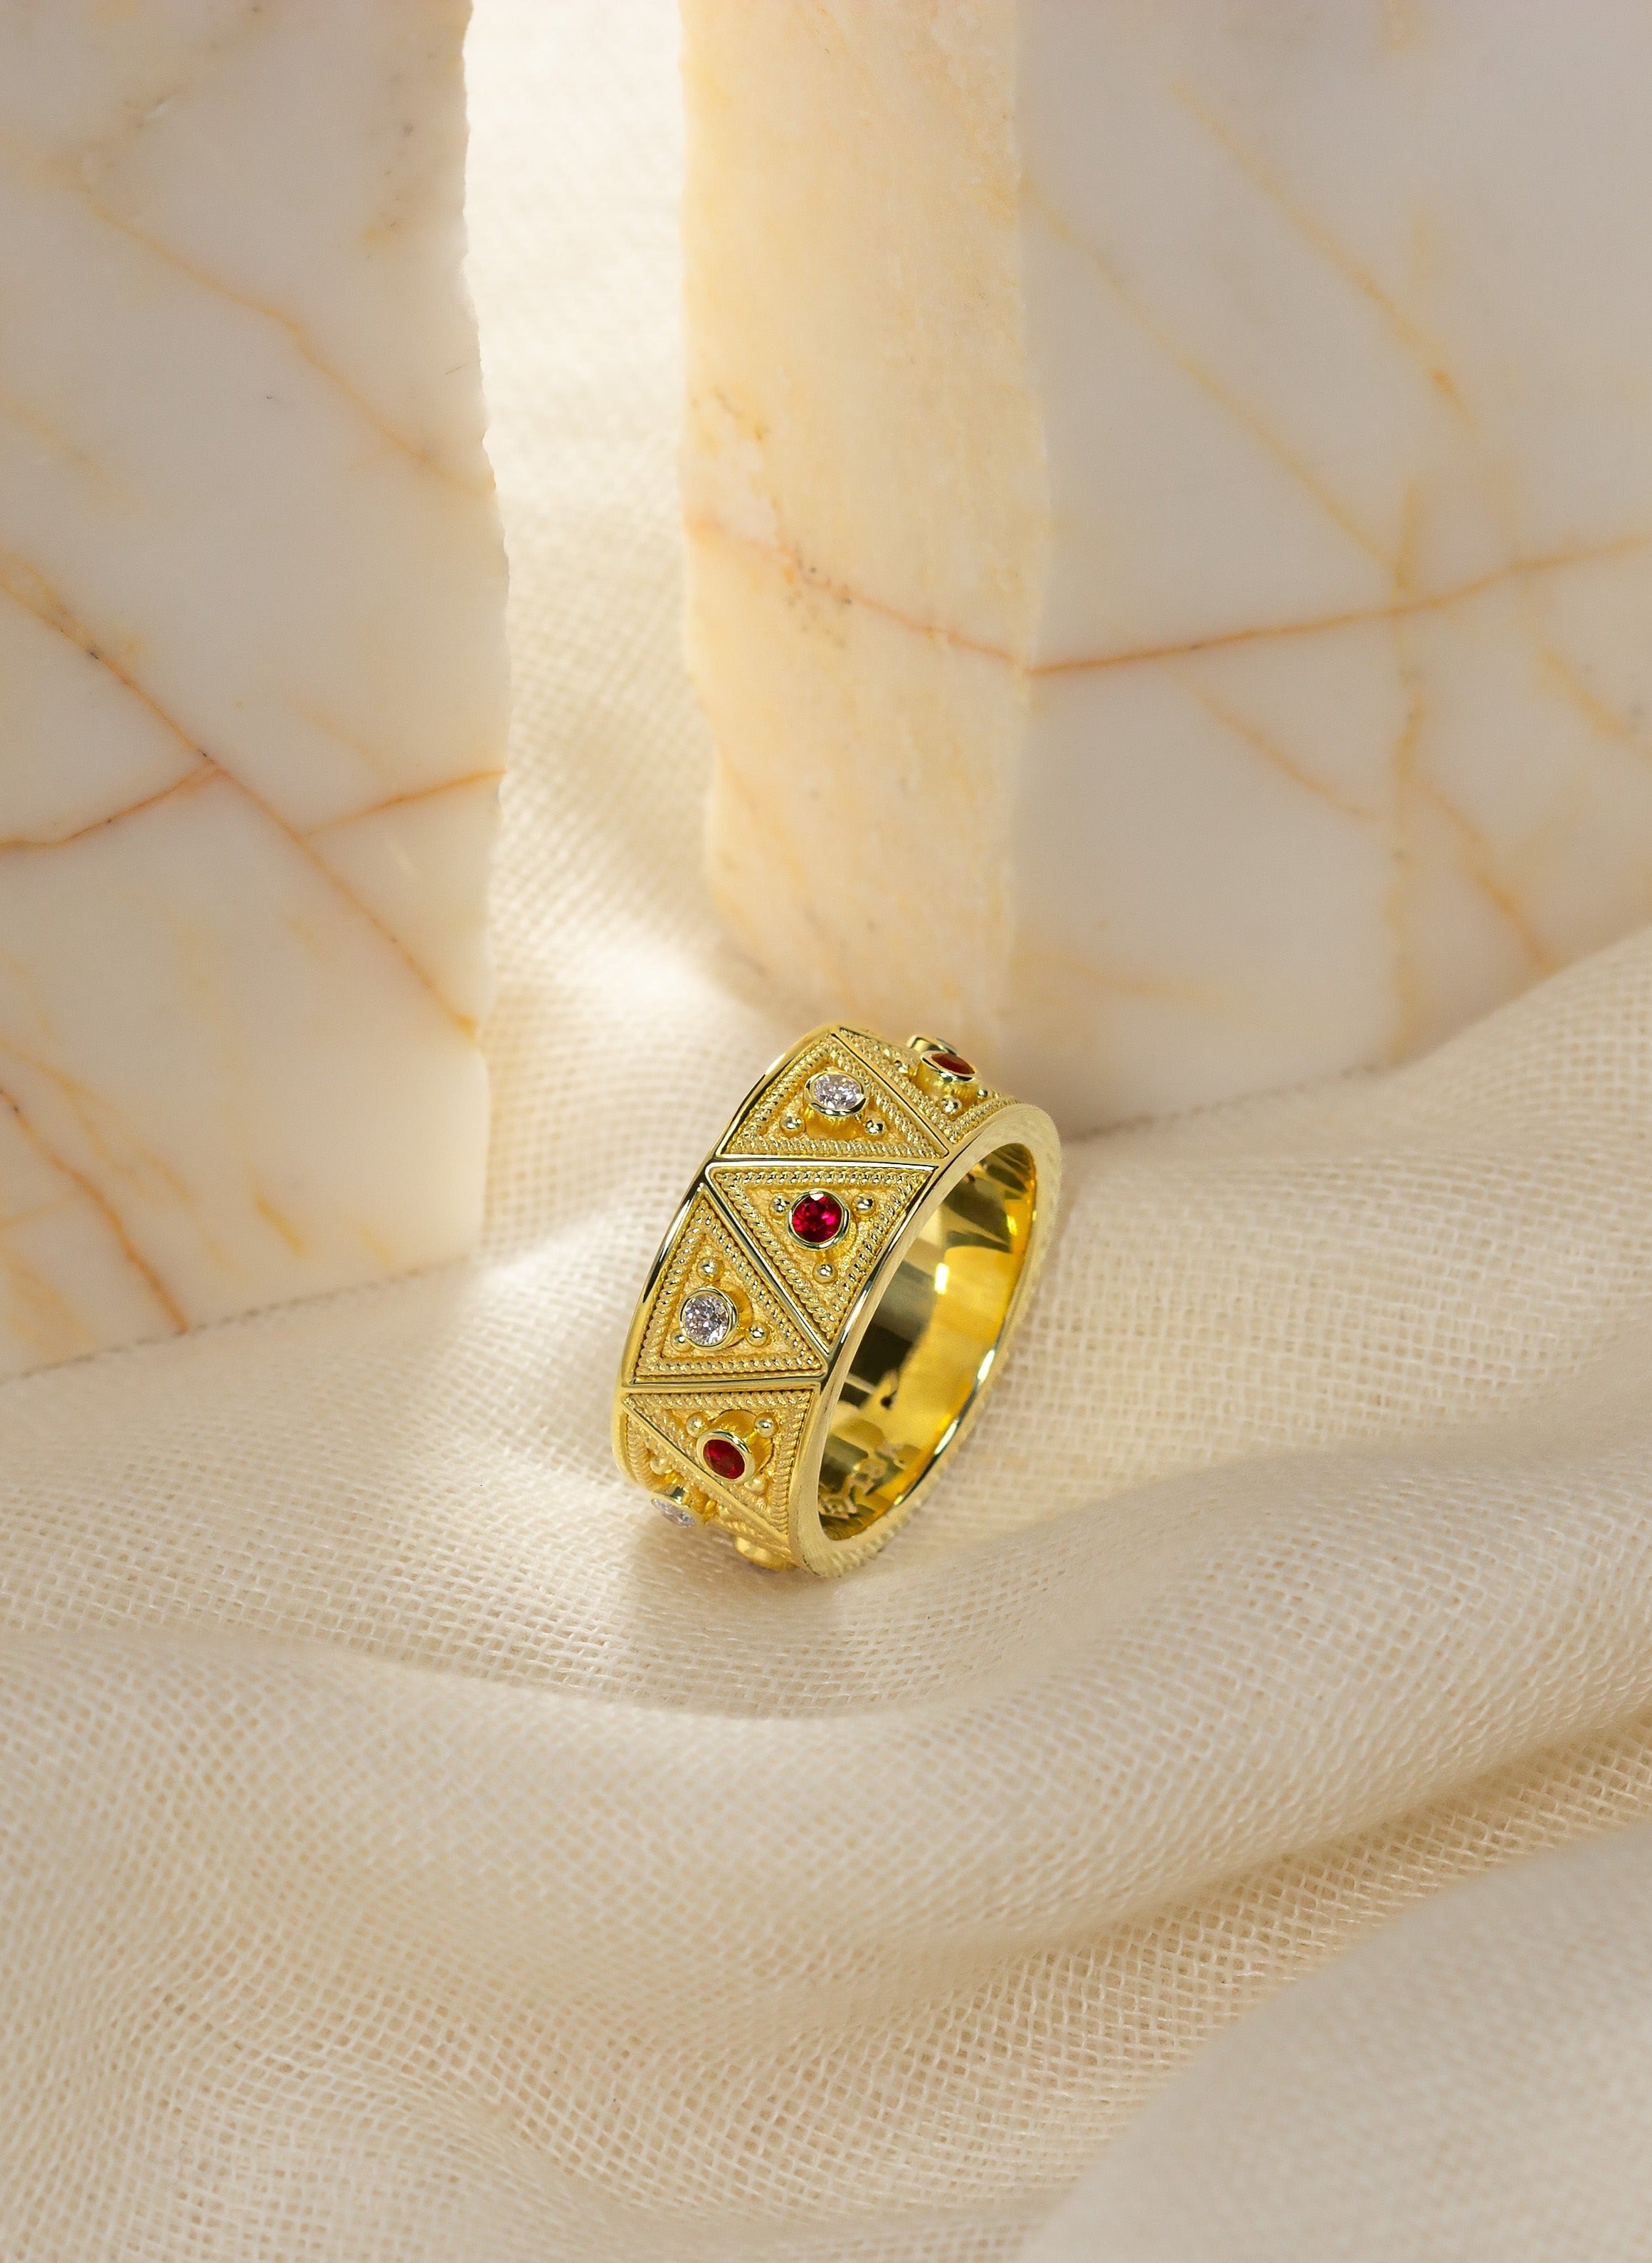 Gold Triangle Motif Ring with Rubies and Diamonds Odysseus Jewelry